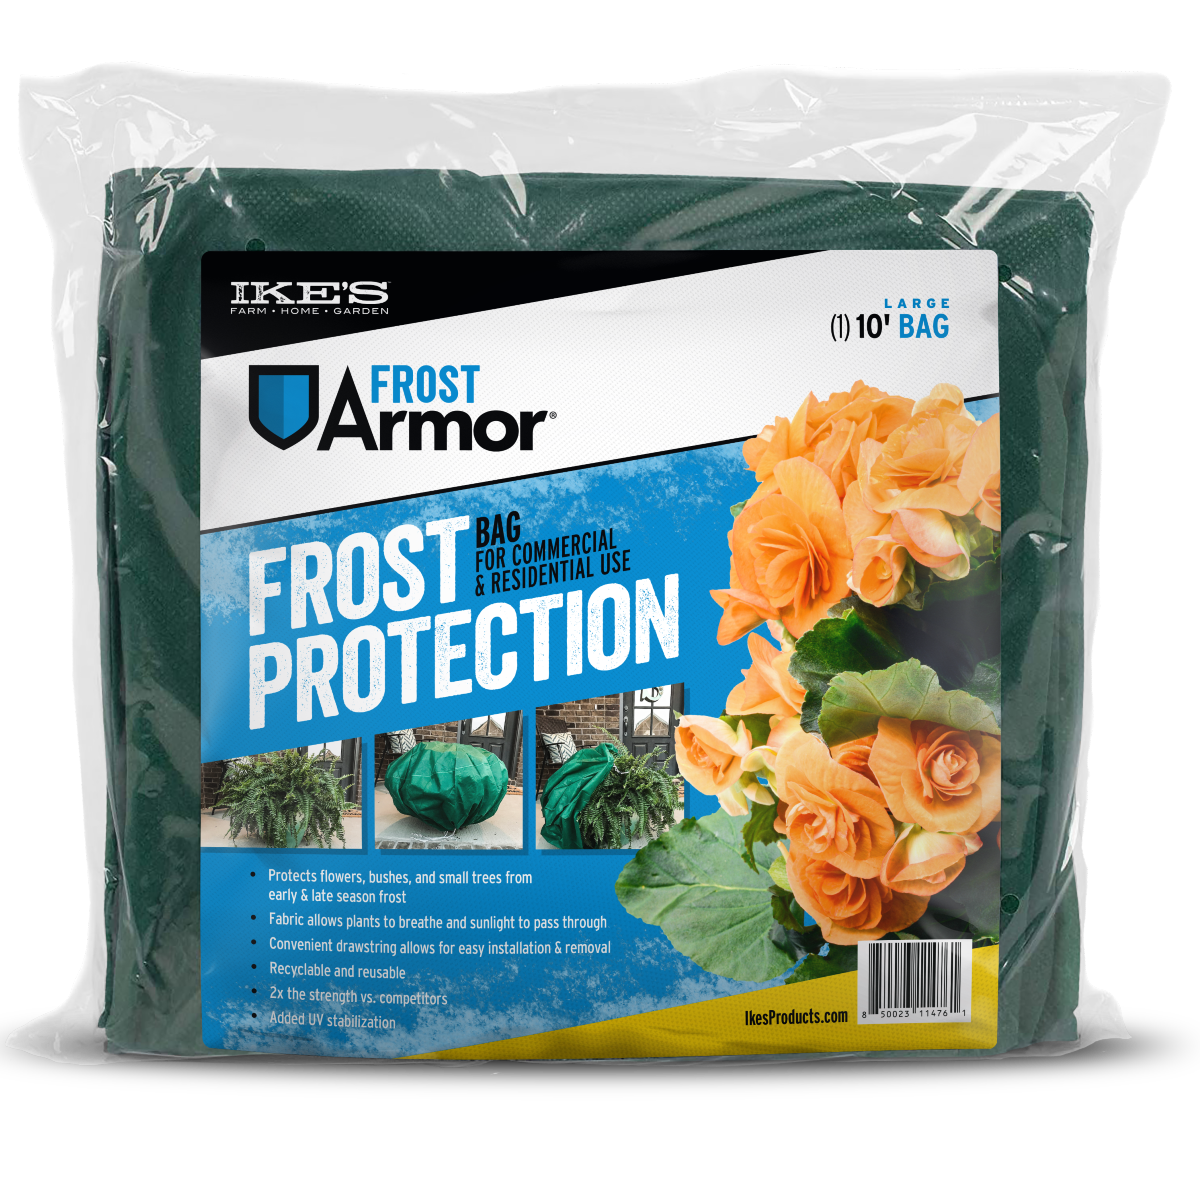 IKE'S Frost Armor Frost Protection bag